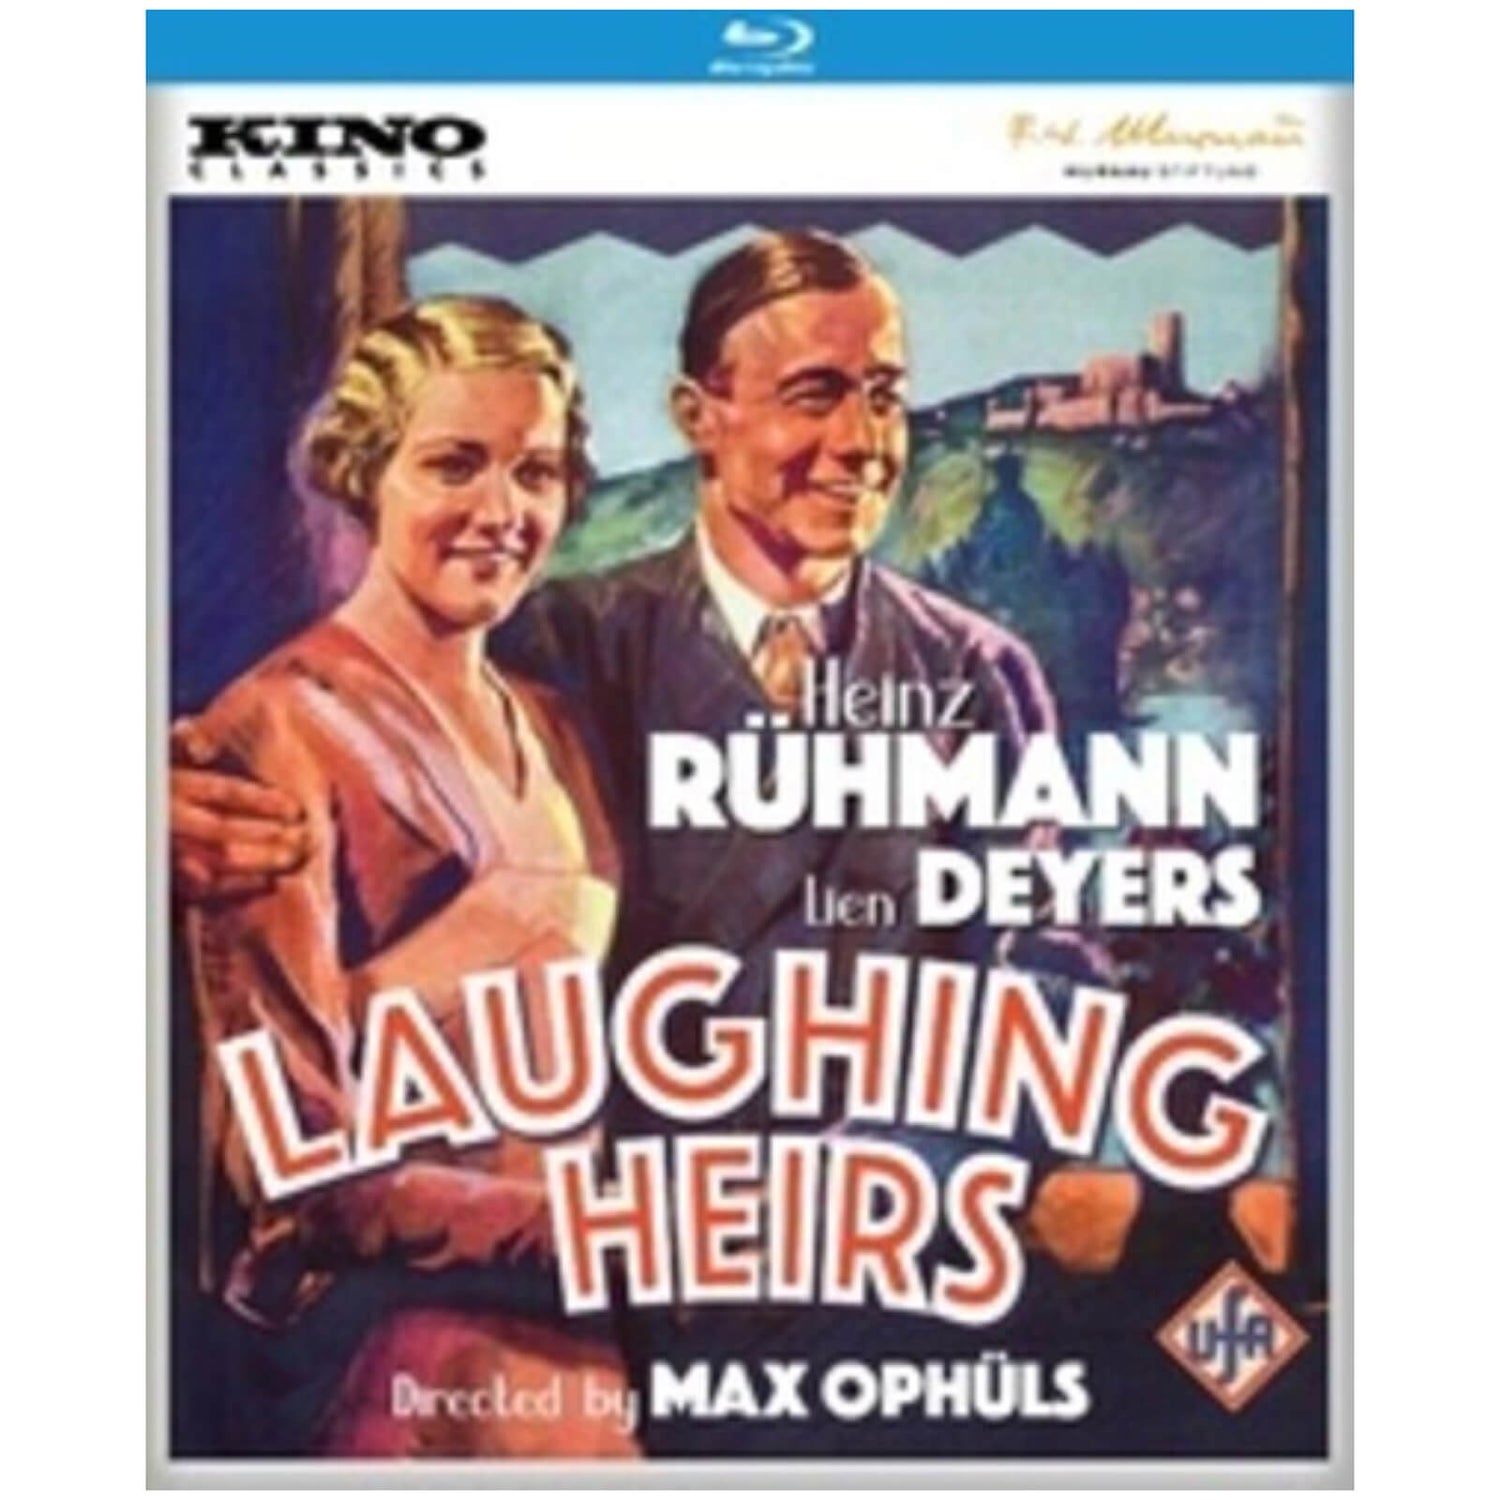 Laughing Heirs (US Import)